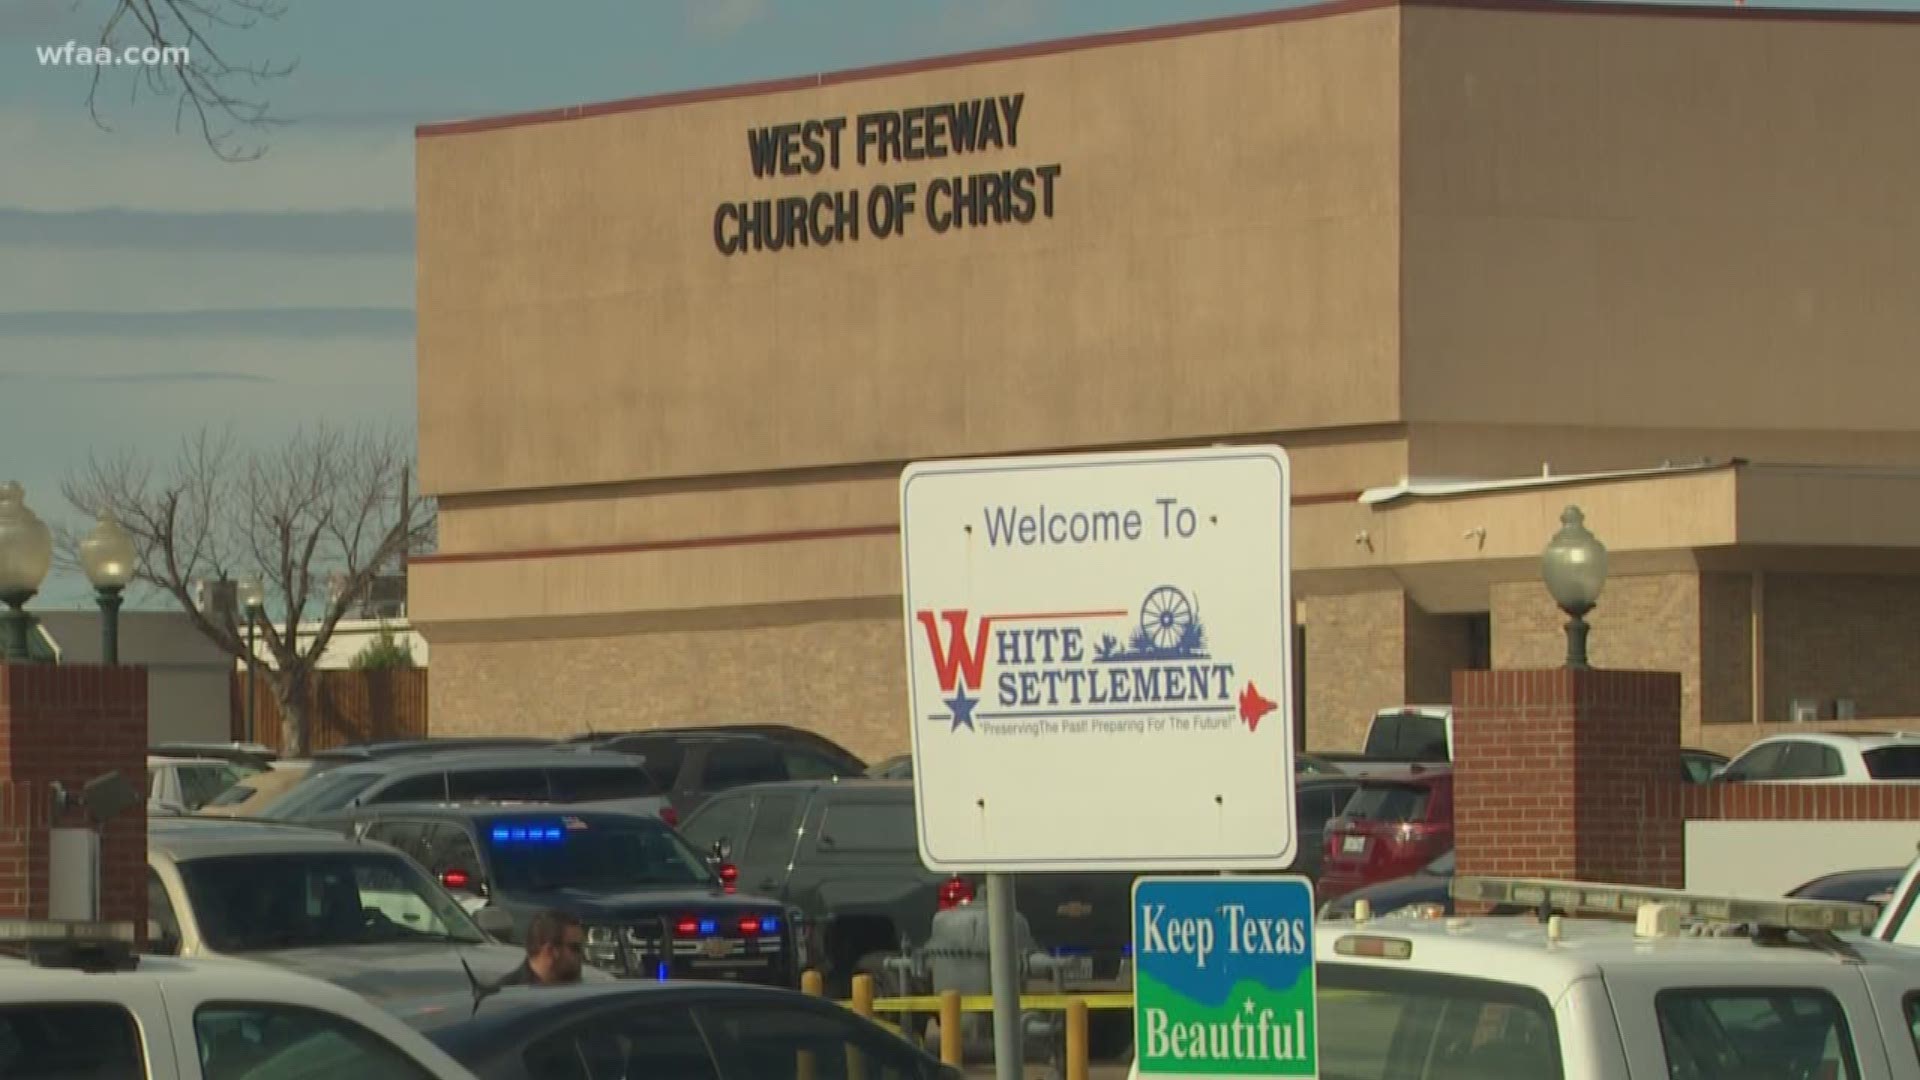 Police say congregants shot and killed a man who opened fire in a church near Fort Worth, Texas.